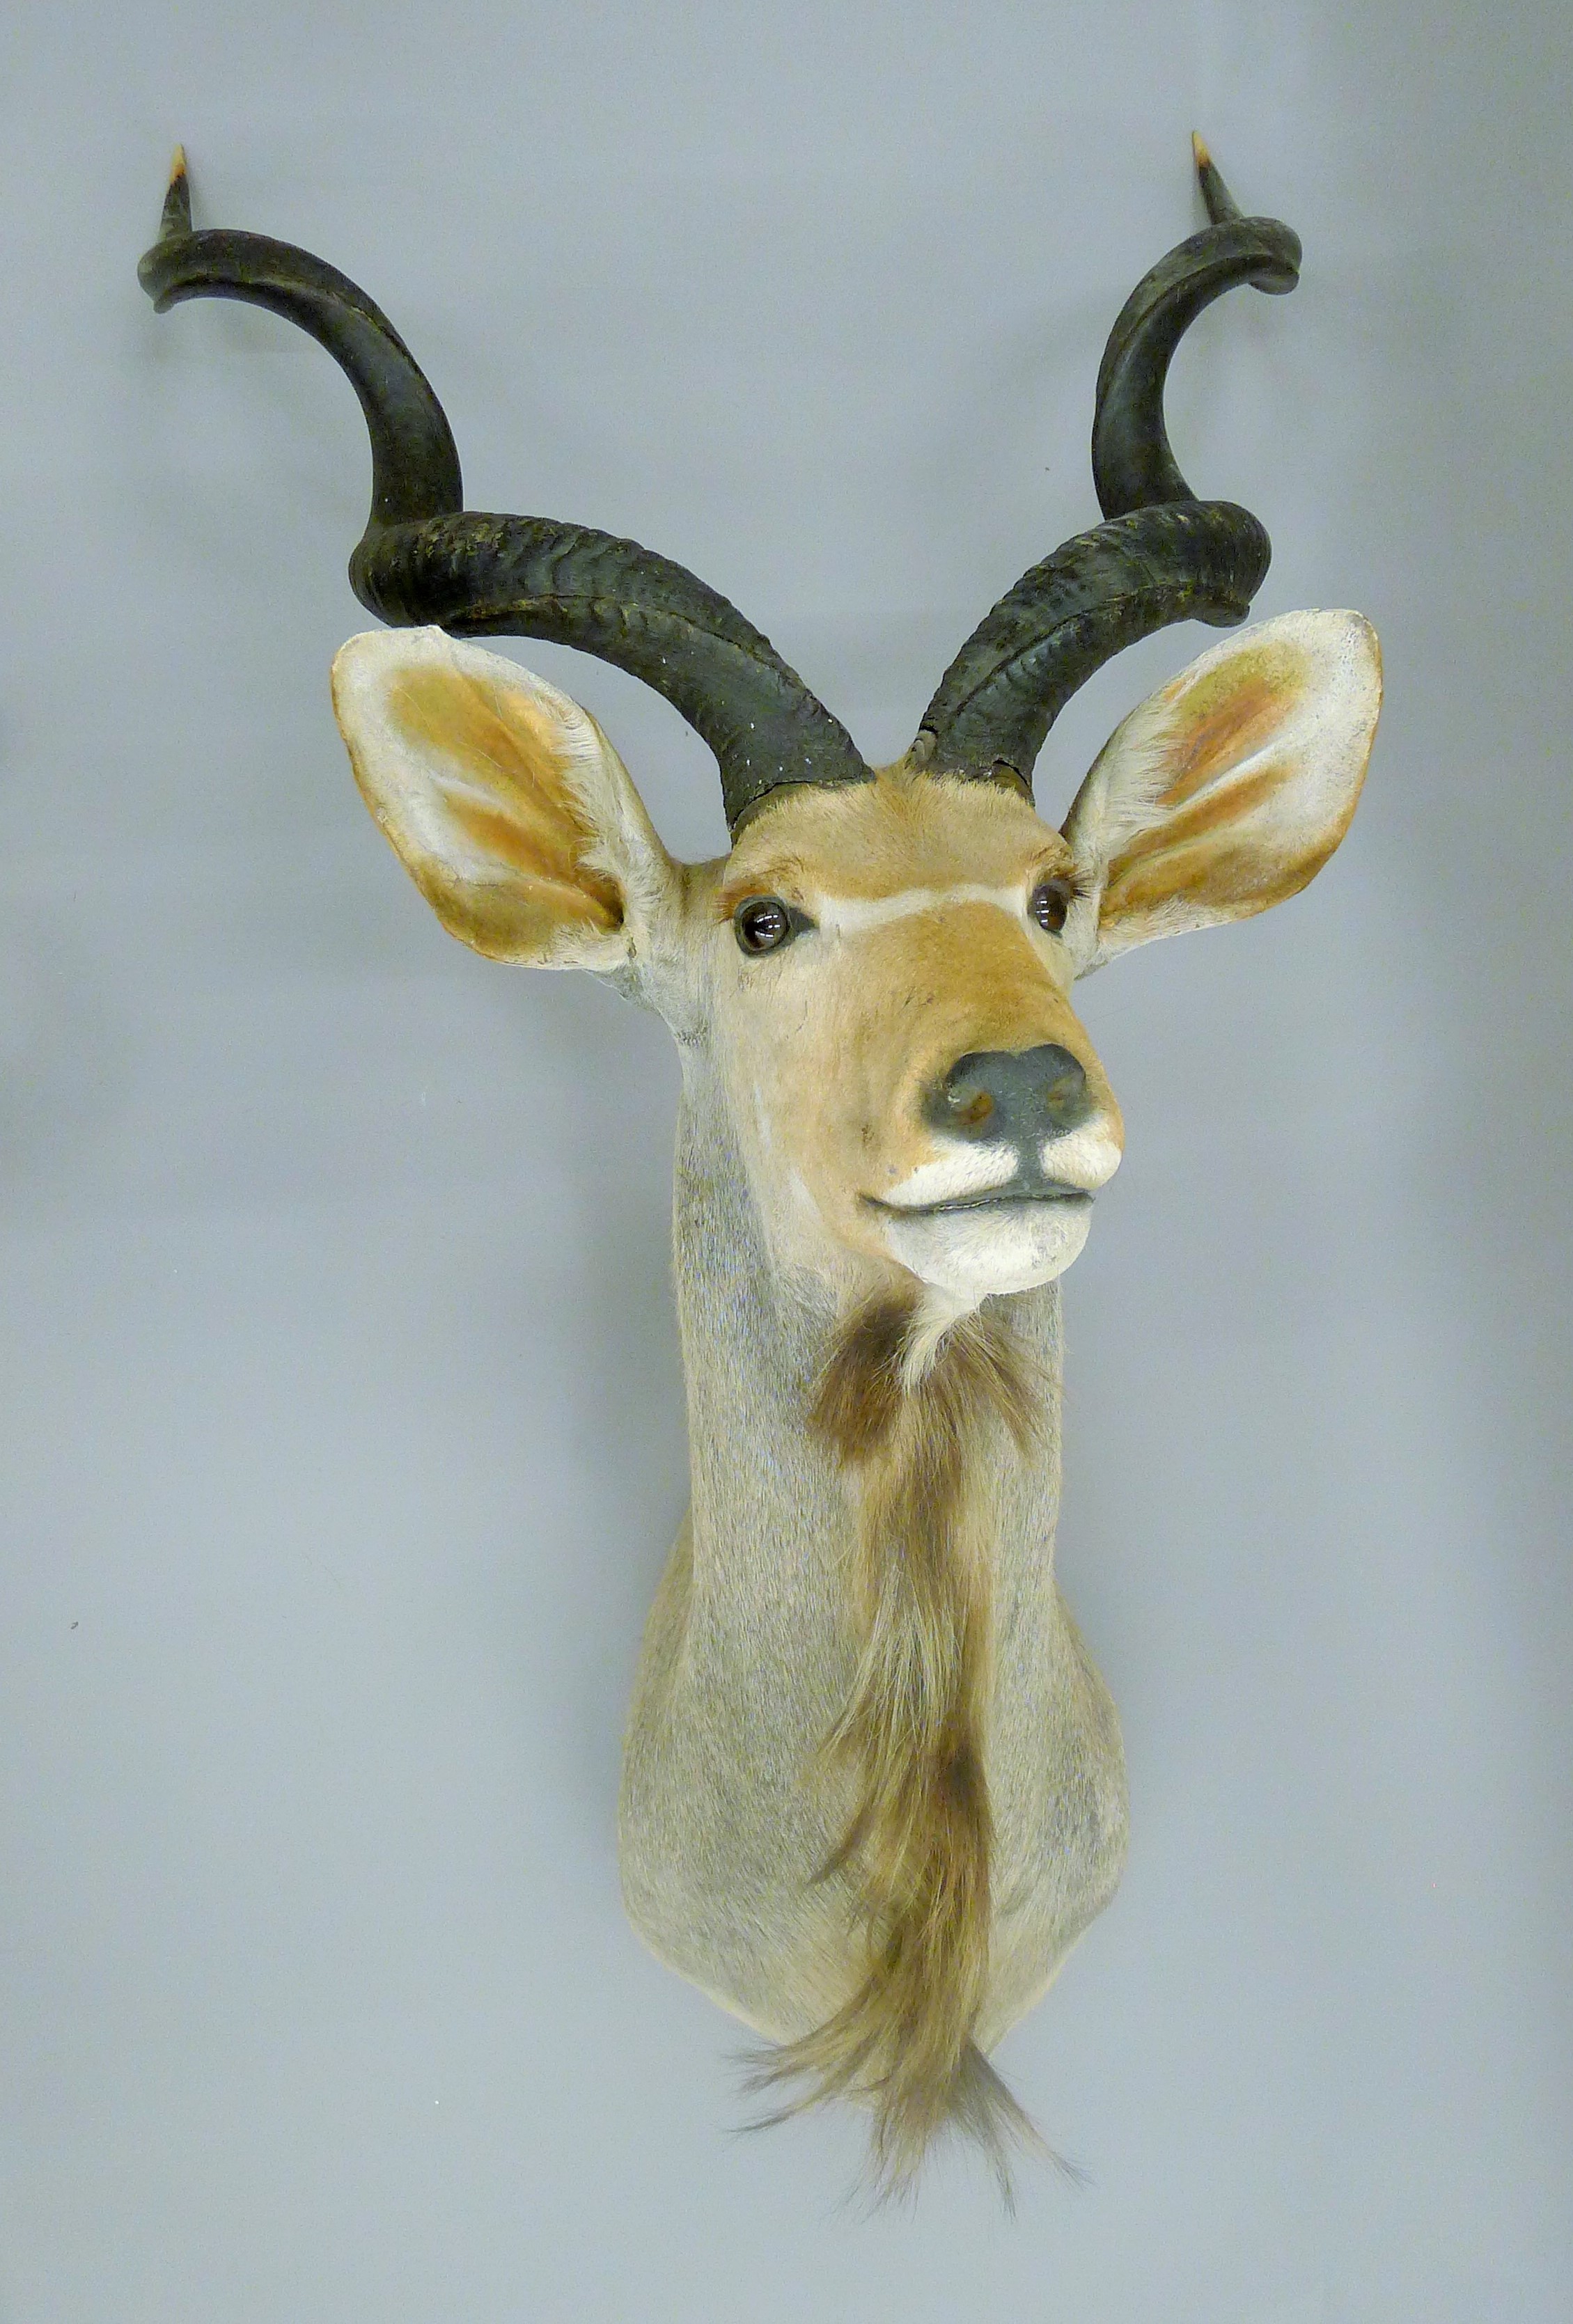 A taxidermy specimen of a Kudu head and horns Tragelaphus imberbis. - Image 2 of 3